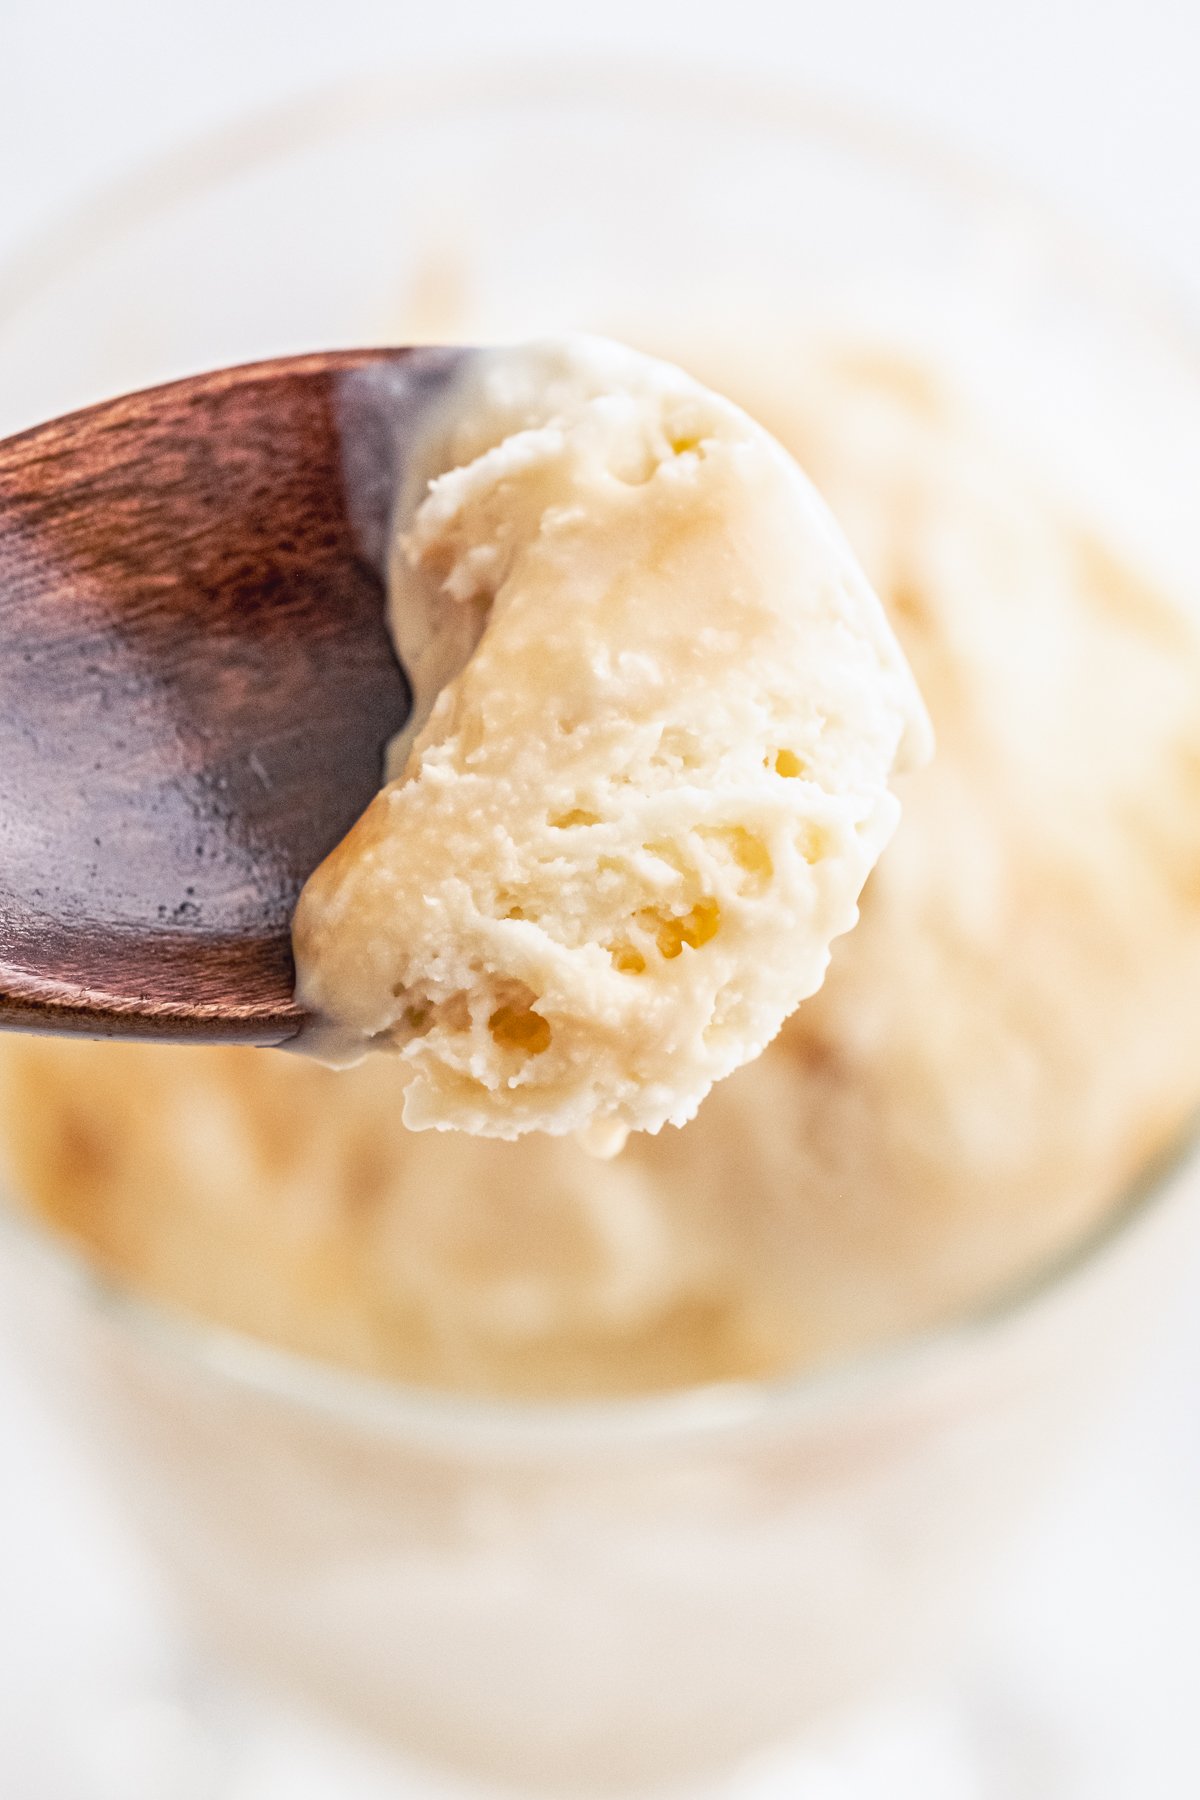 Spoon holding up a scoop of Caramel Ice Cream from glass